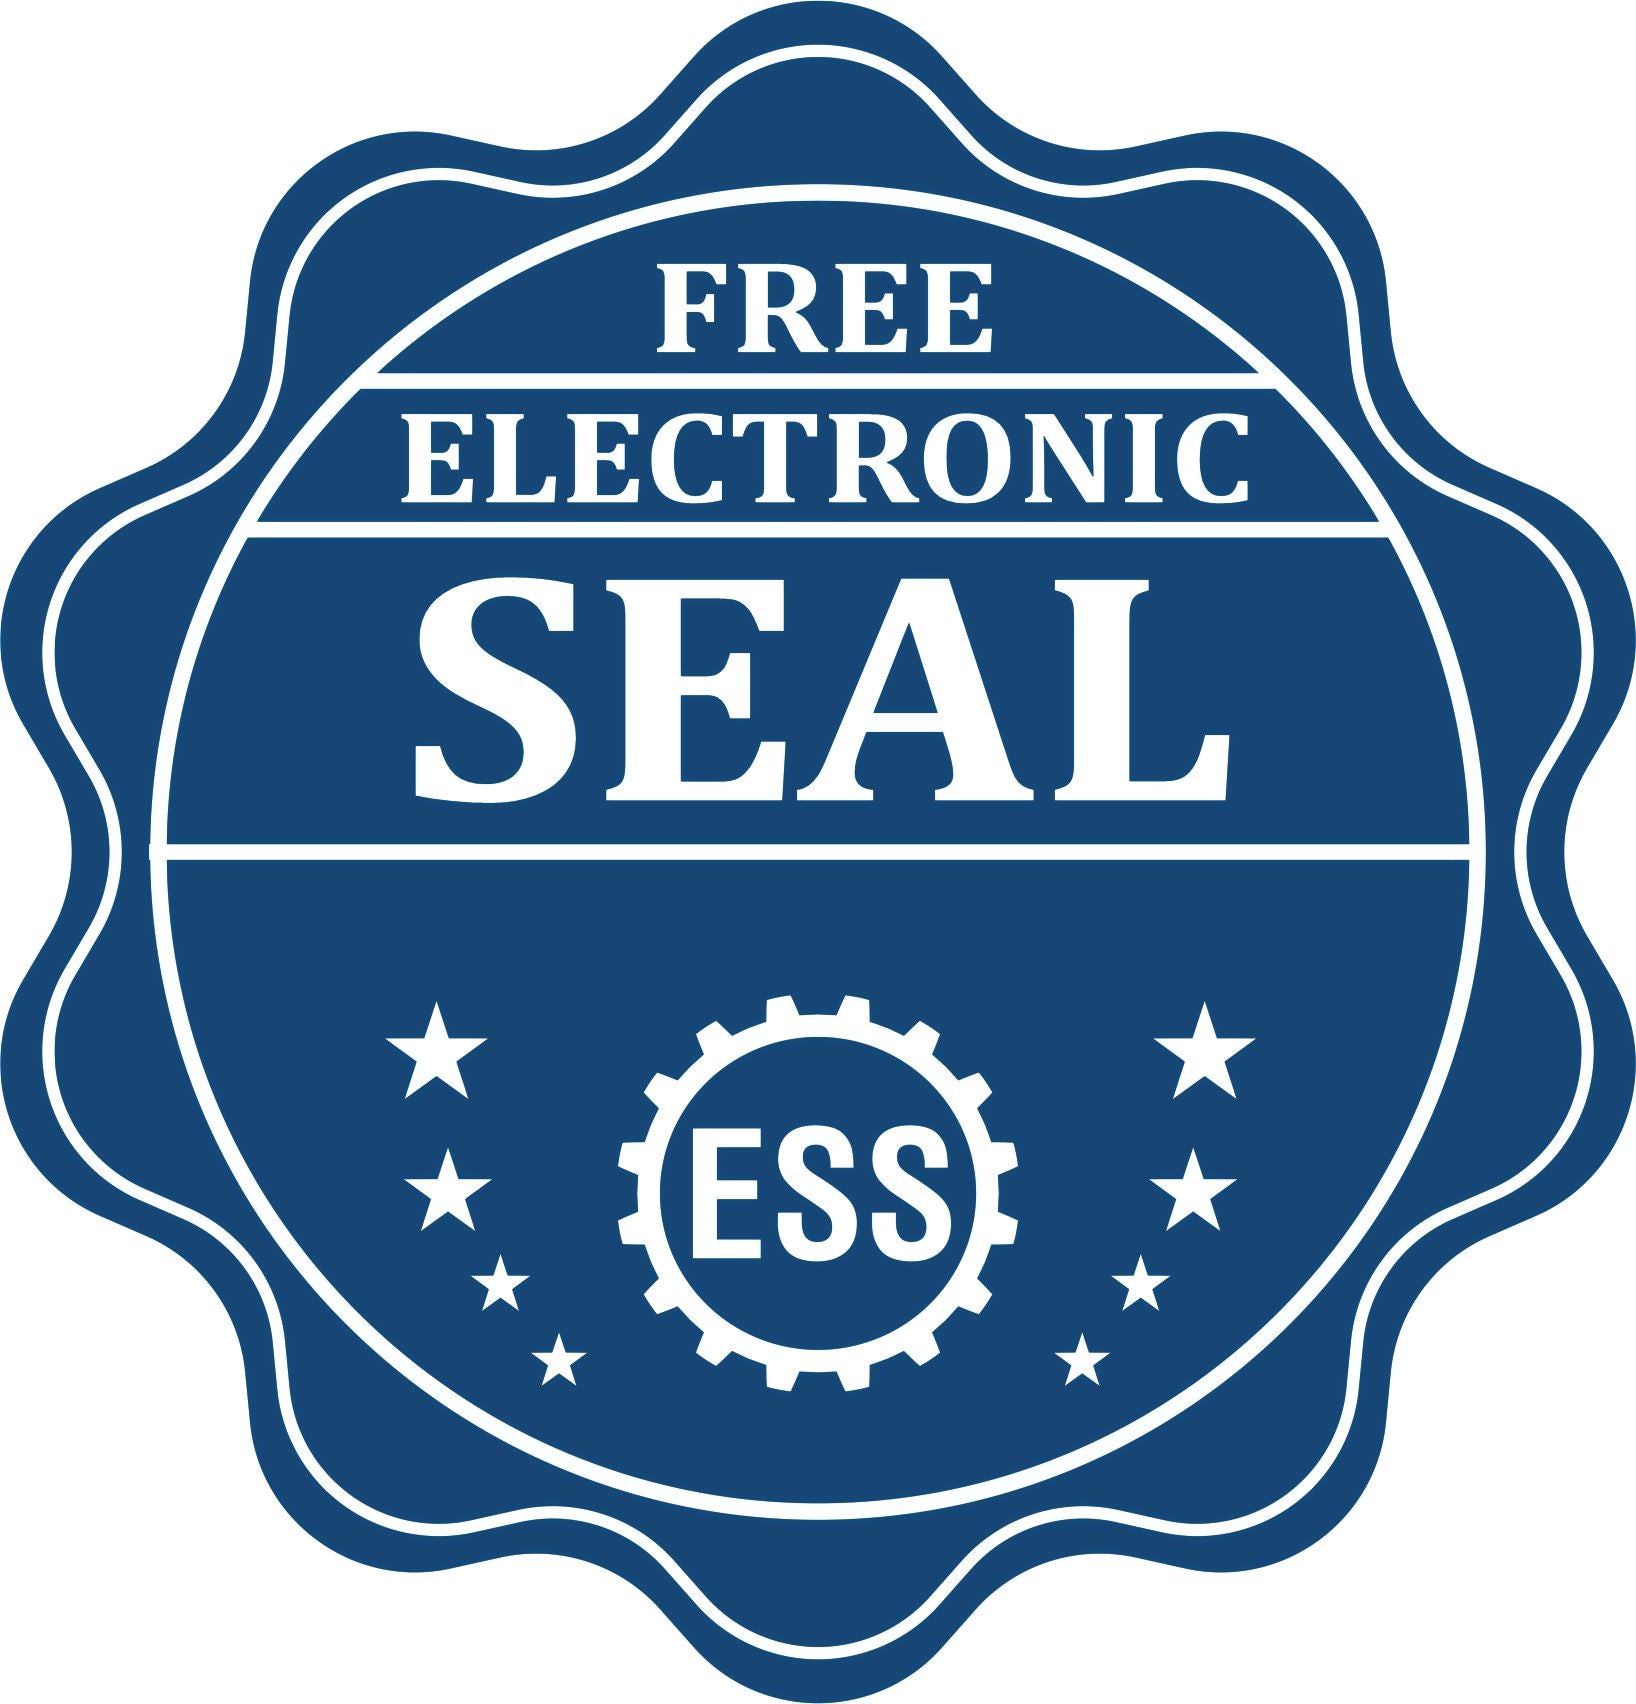 A badge showing a free electronic seal for the Florida Engineer Desk Seal with stars and the ESS gear on the emblem.